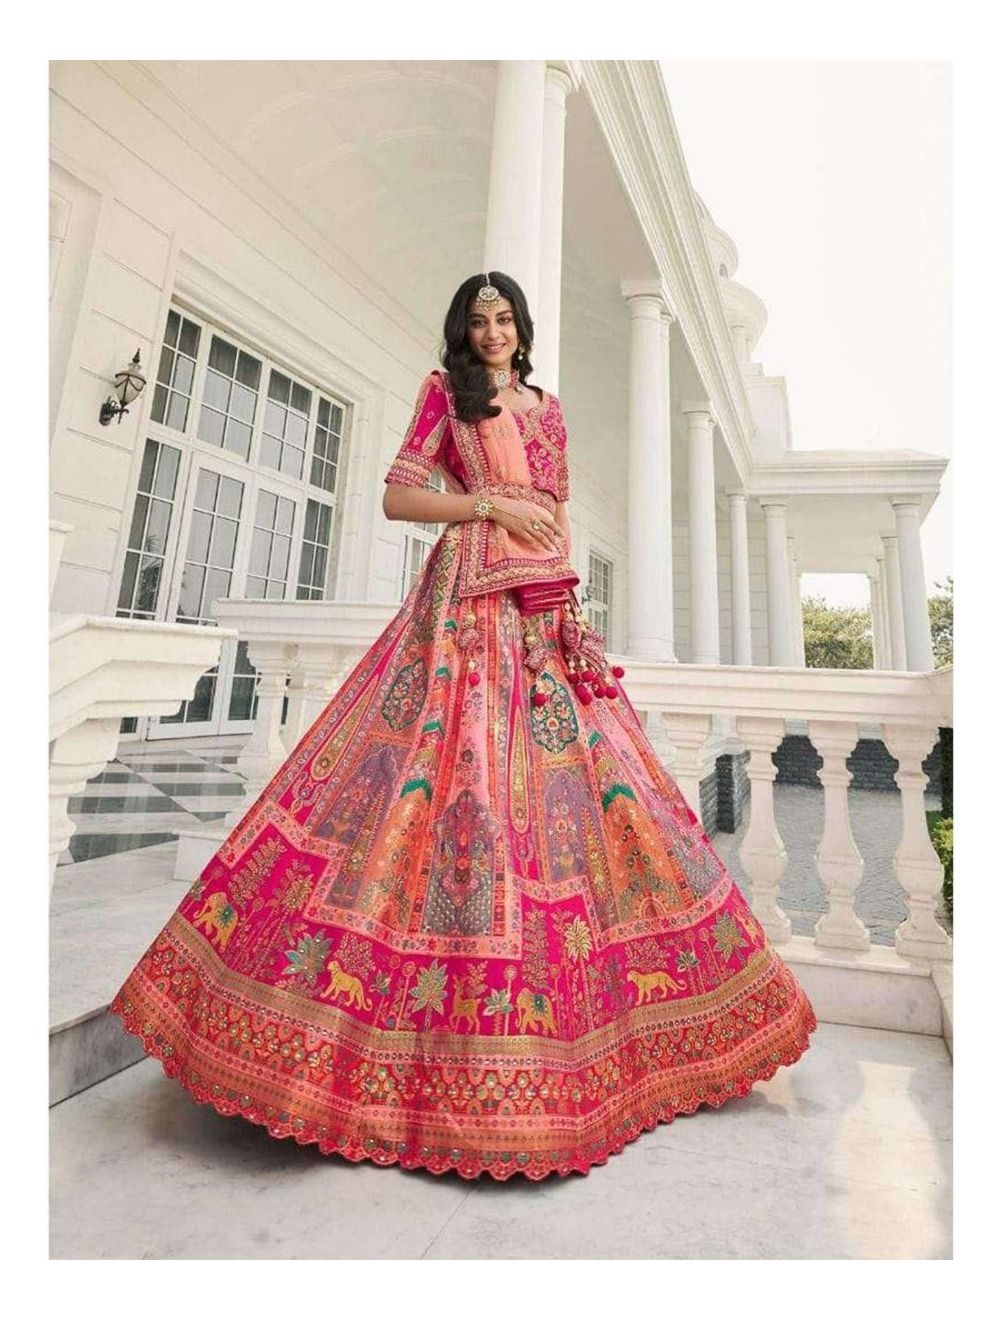 Buy Lehenga Choli Online at best prices from Shree Designer Saree Catch our  latest Collection of Indian Lehengas, Bridal Lehenga Choli, Designer Lehenga  Choli, Wedding Lehenga Cholis other lehenga designs for Women